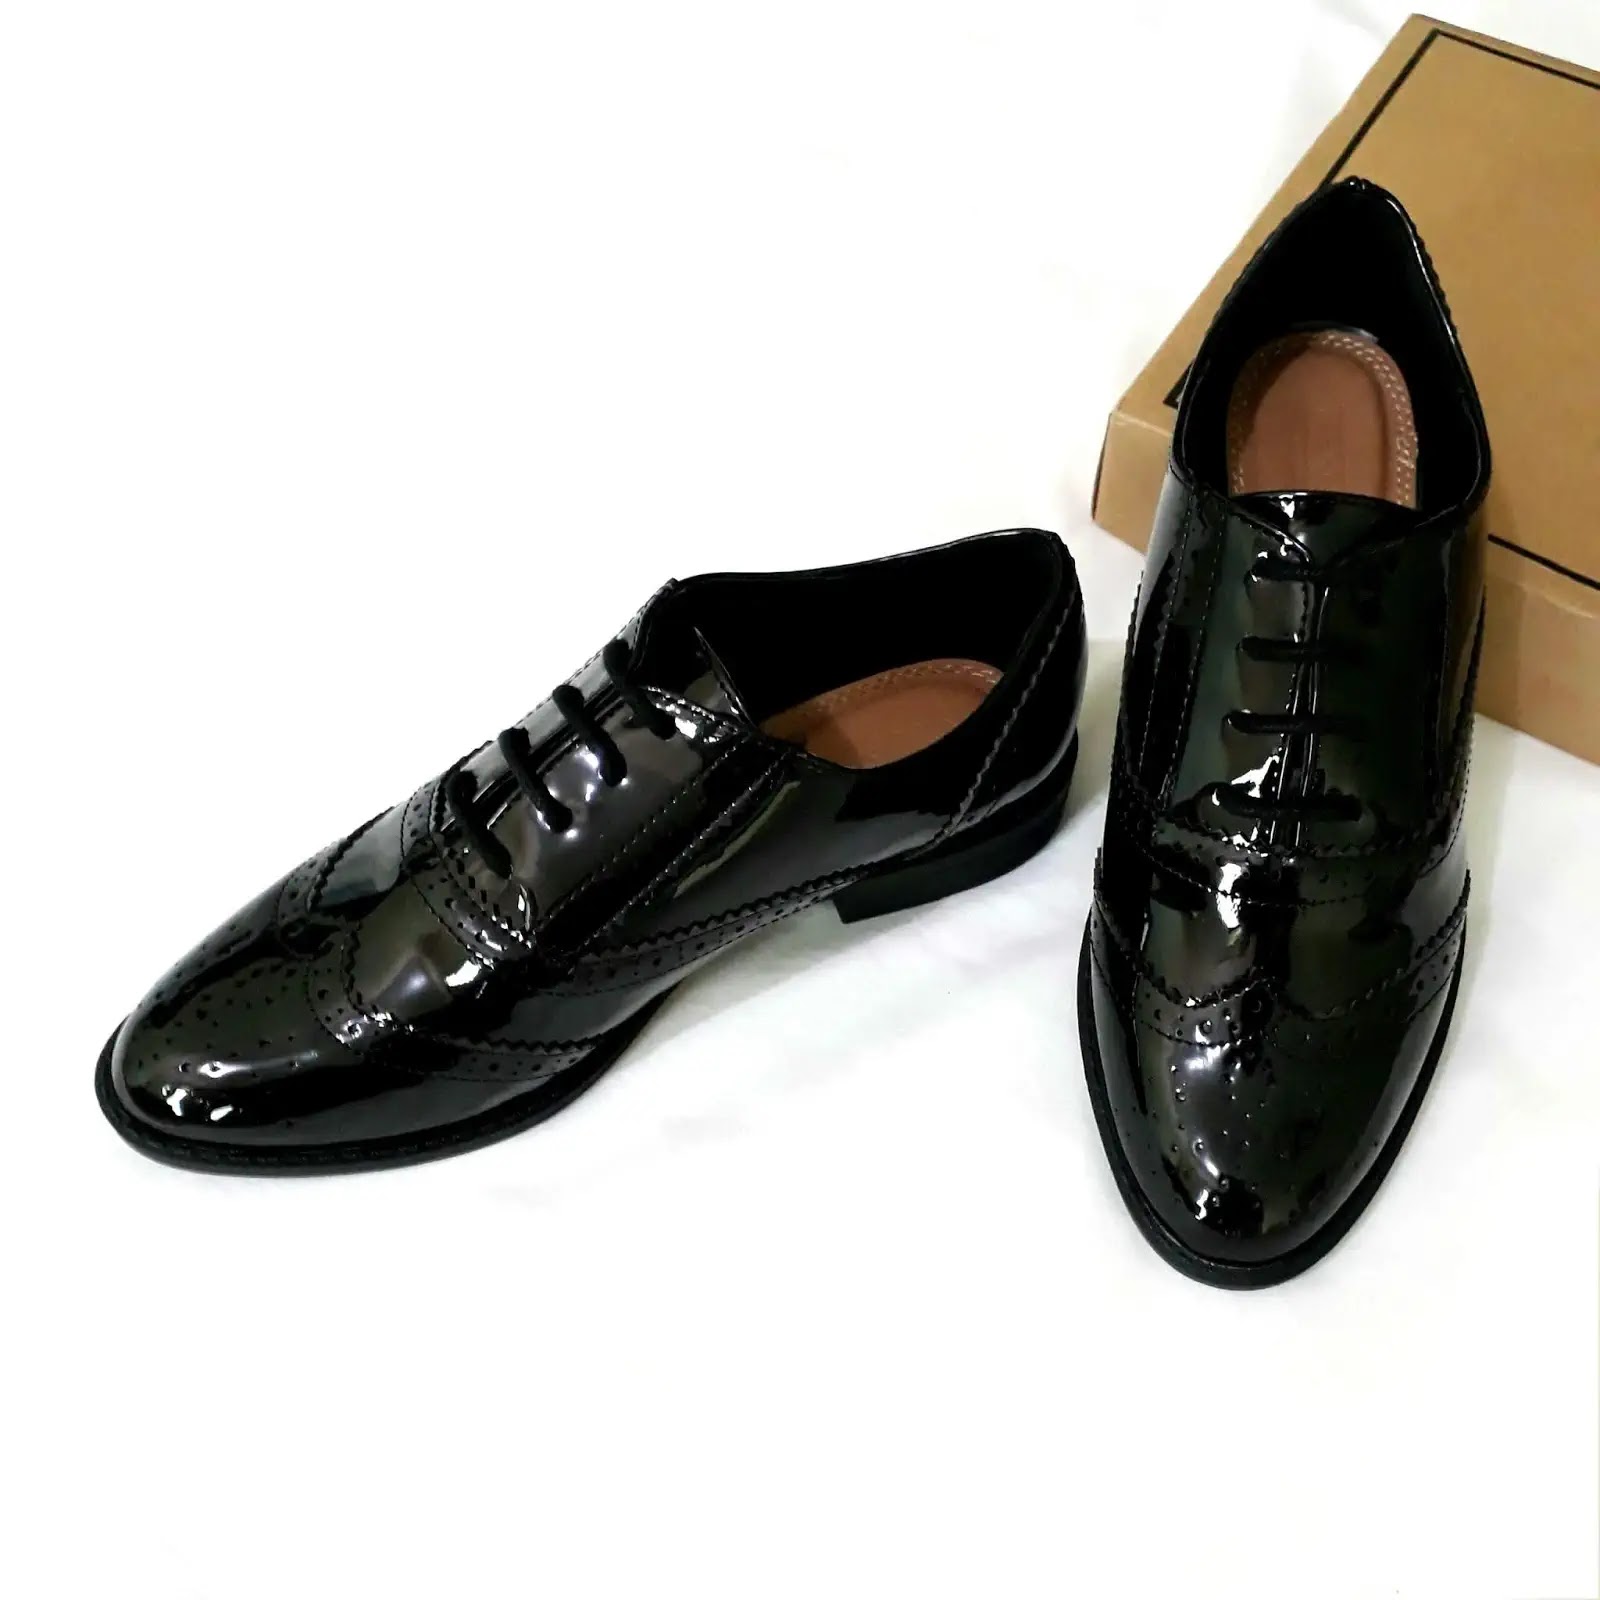 3989 Bex Smooth Leather Brogue Shoes in Black | Dr. Martens